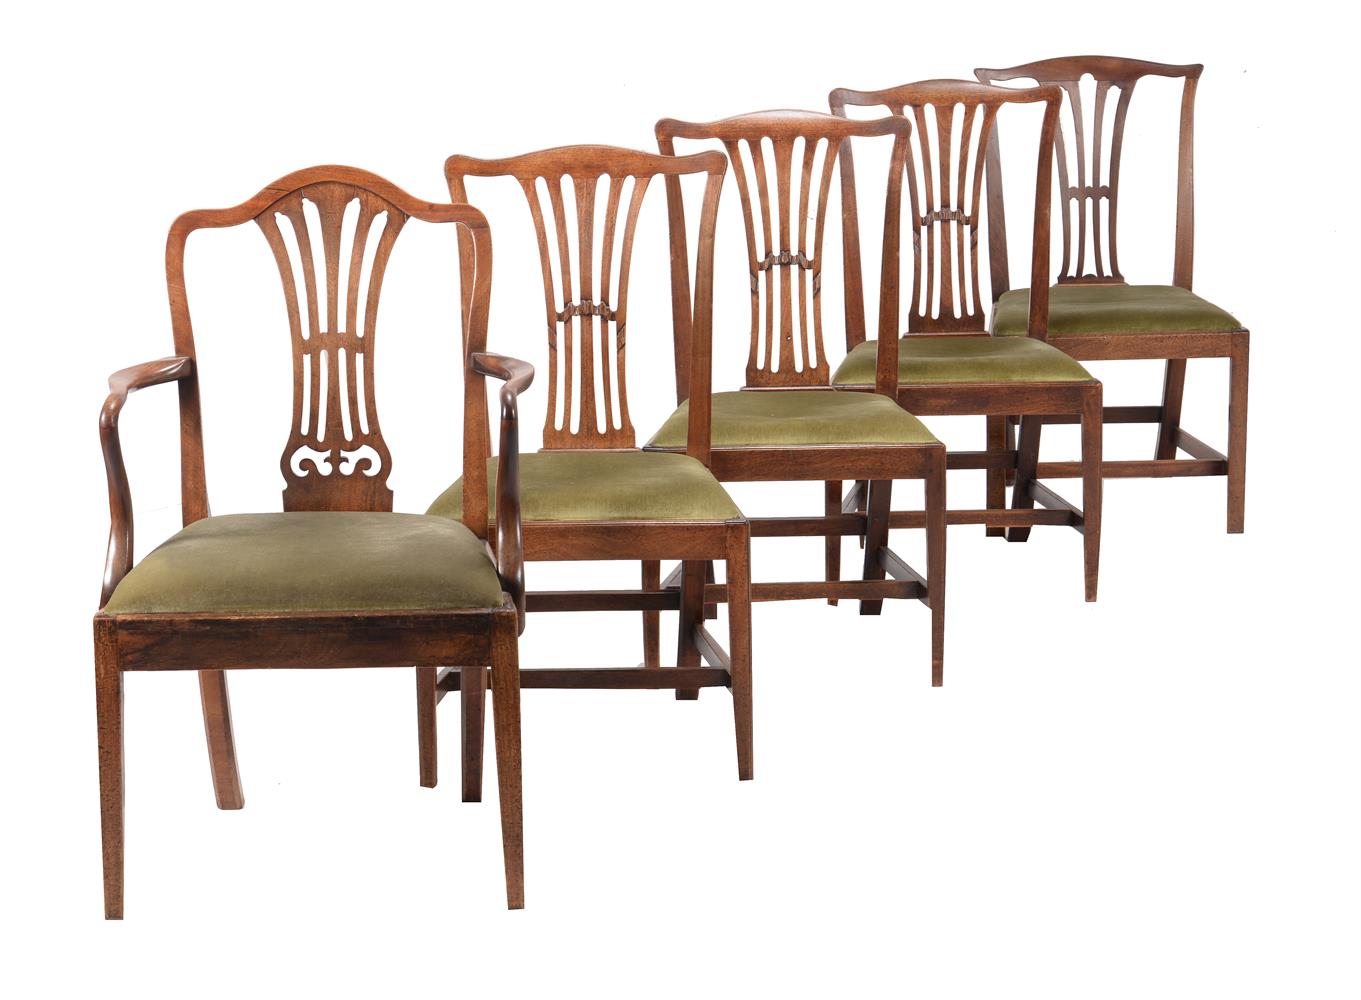 A harlequin set of ten mahogany dining chairs in George III style